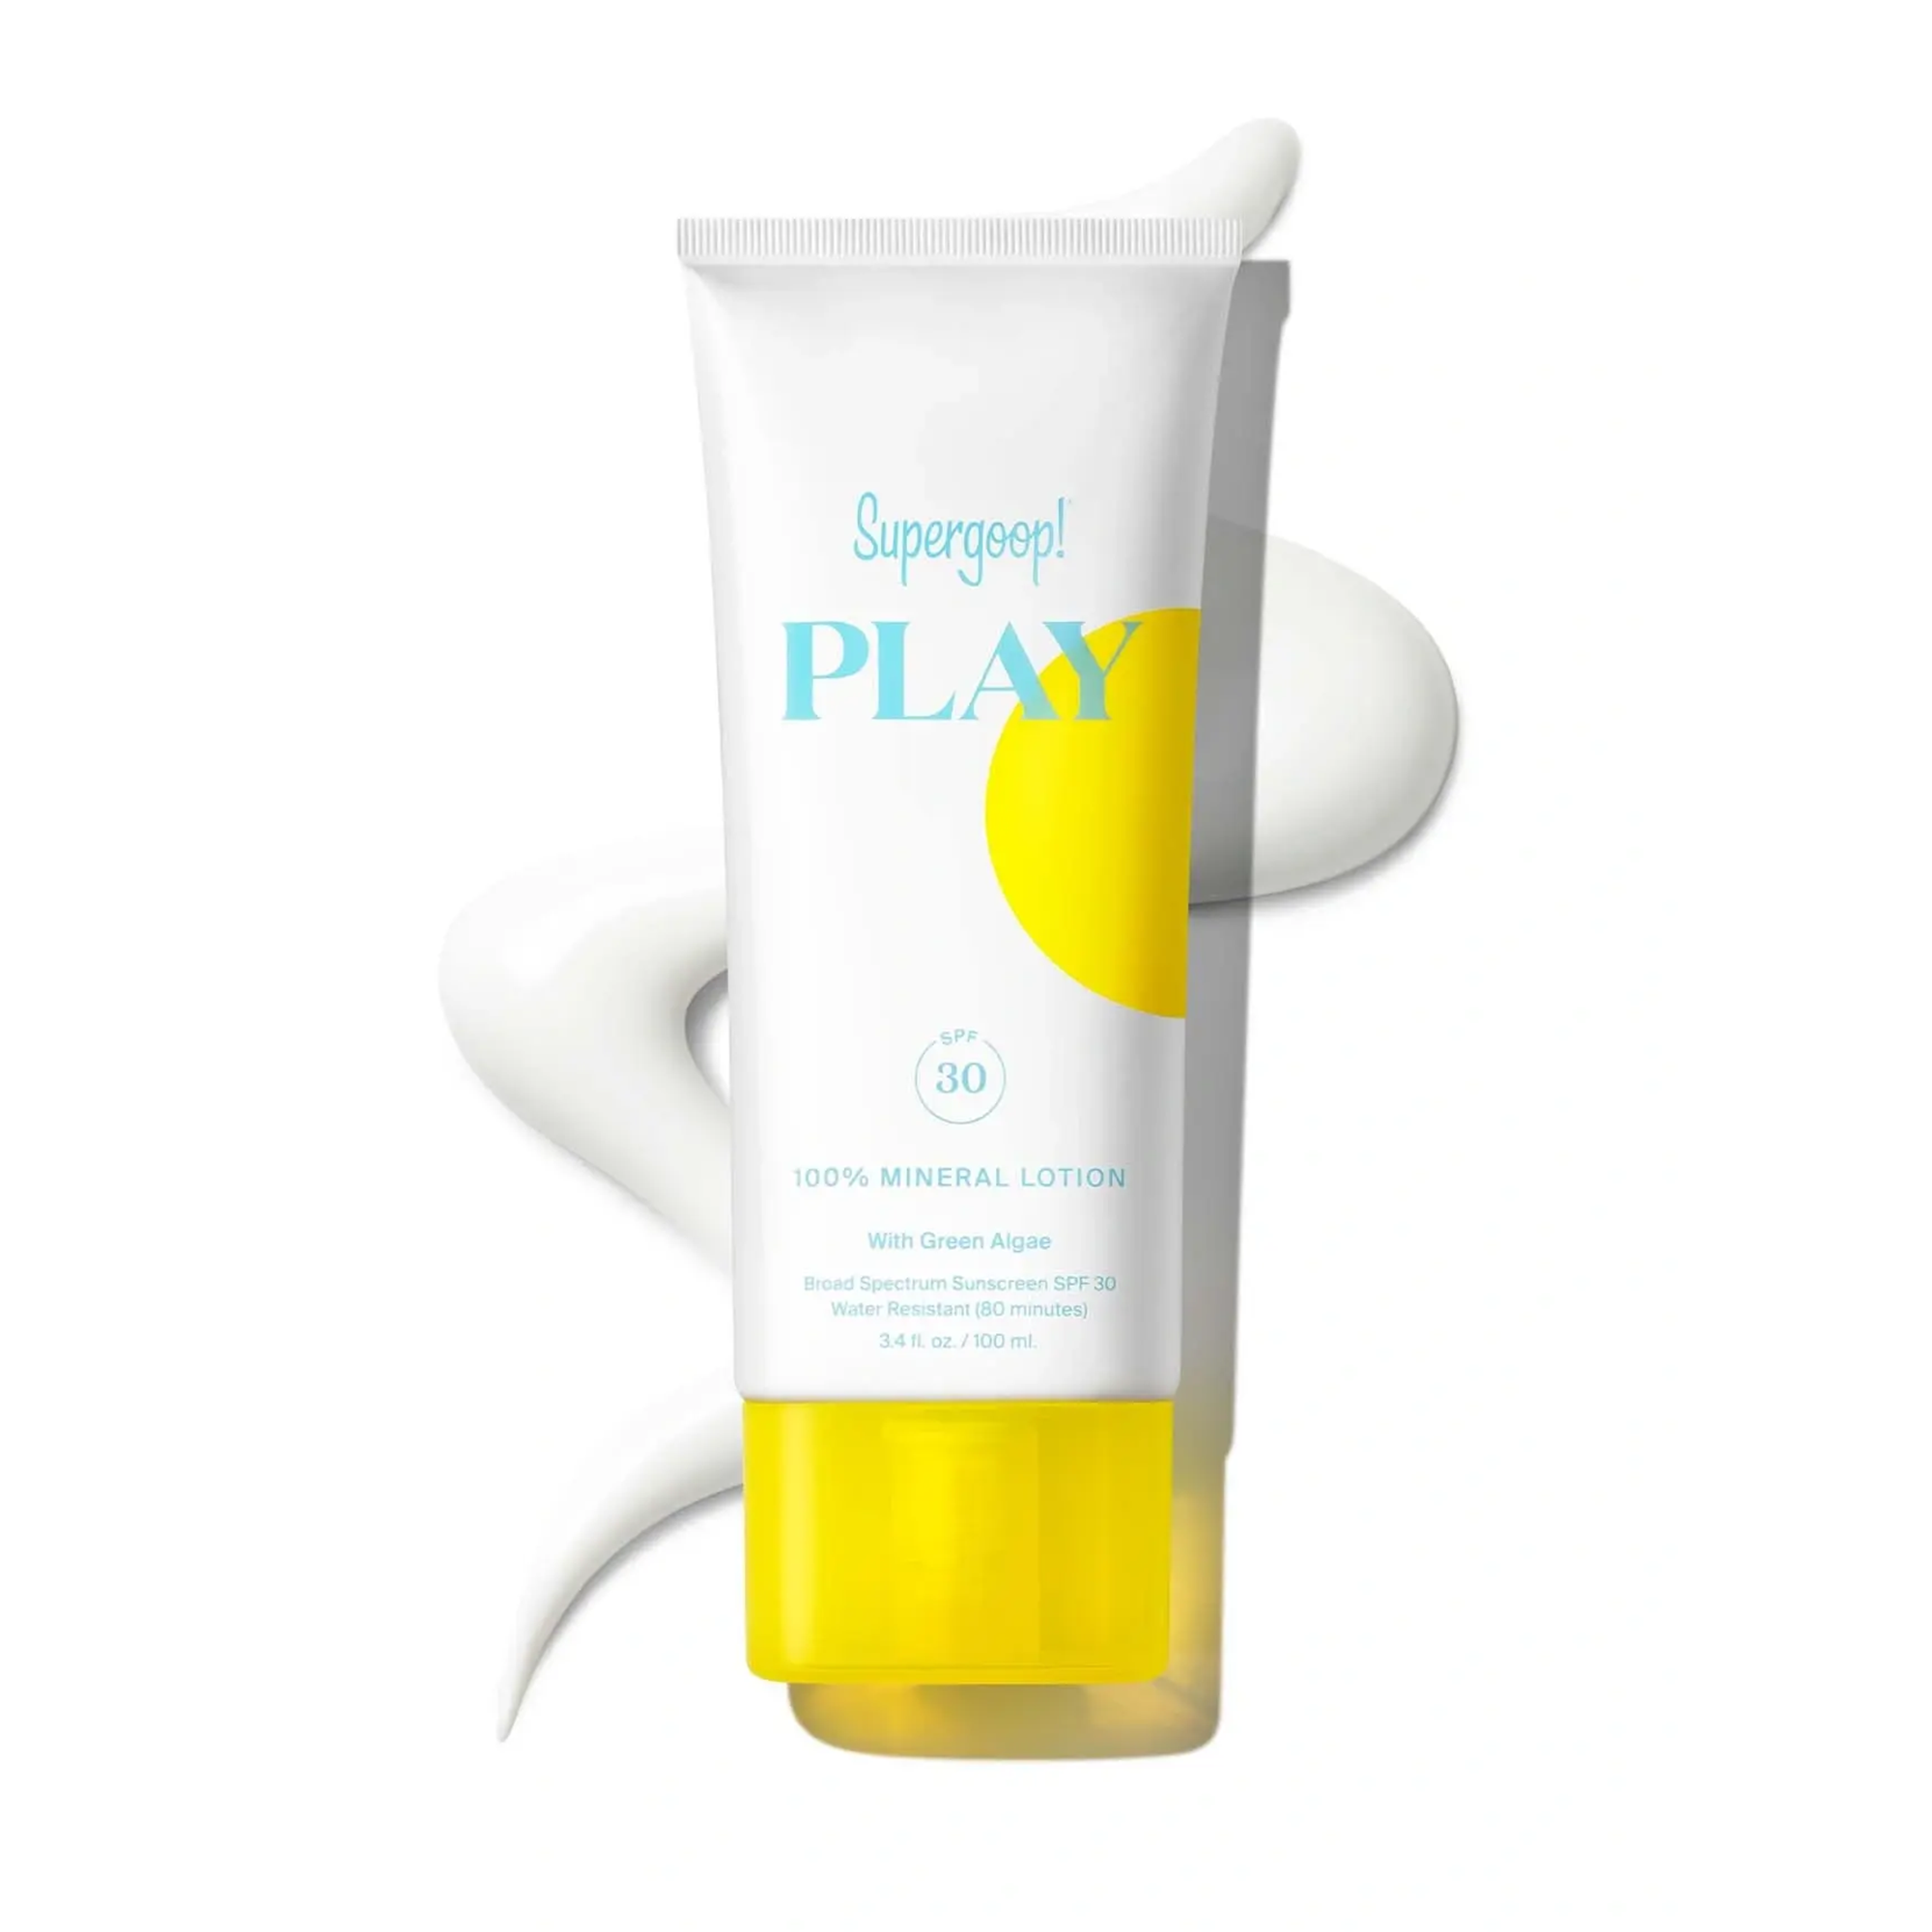 Supergoop! Play 100% Mineral Lotion SPF 30 with Green Algae / 3.4OZ